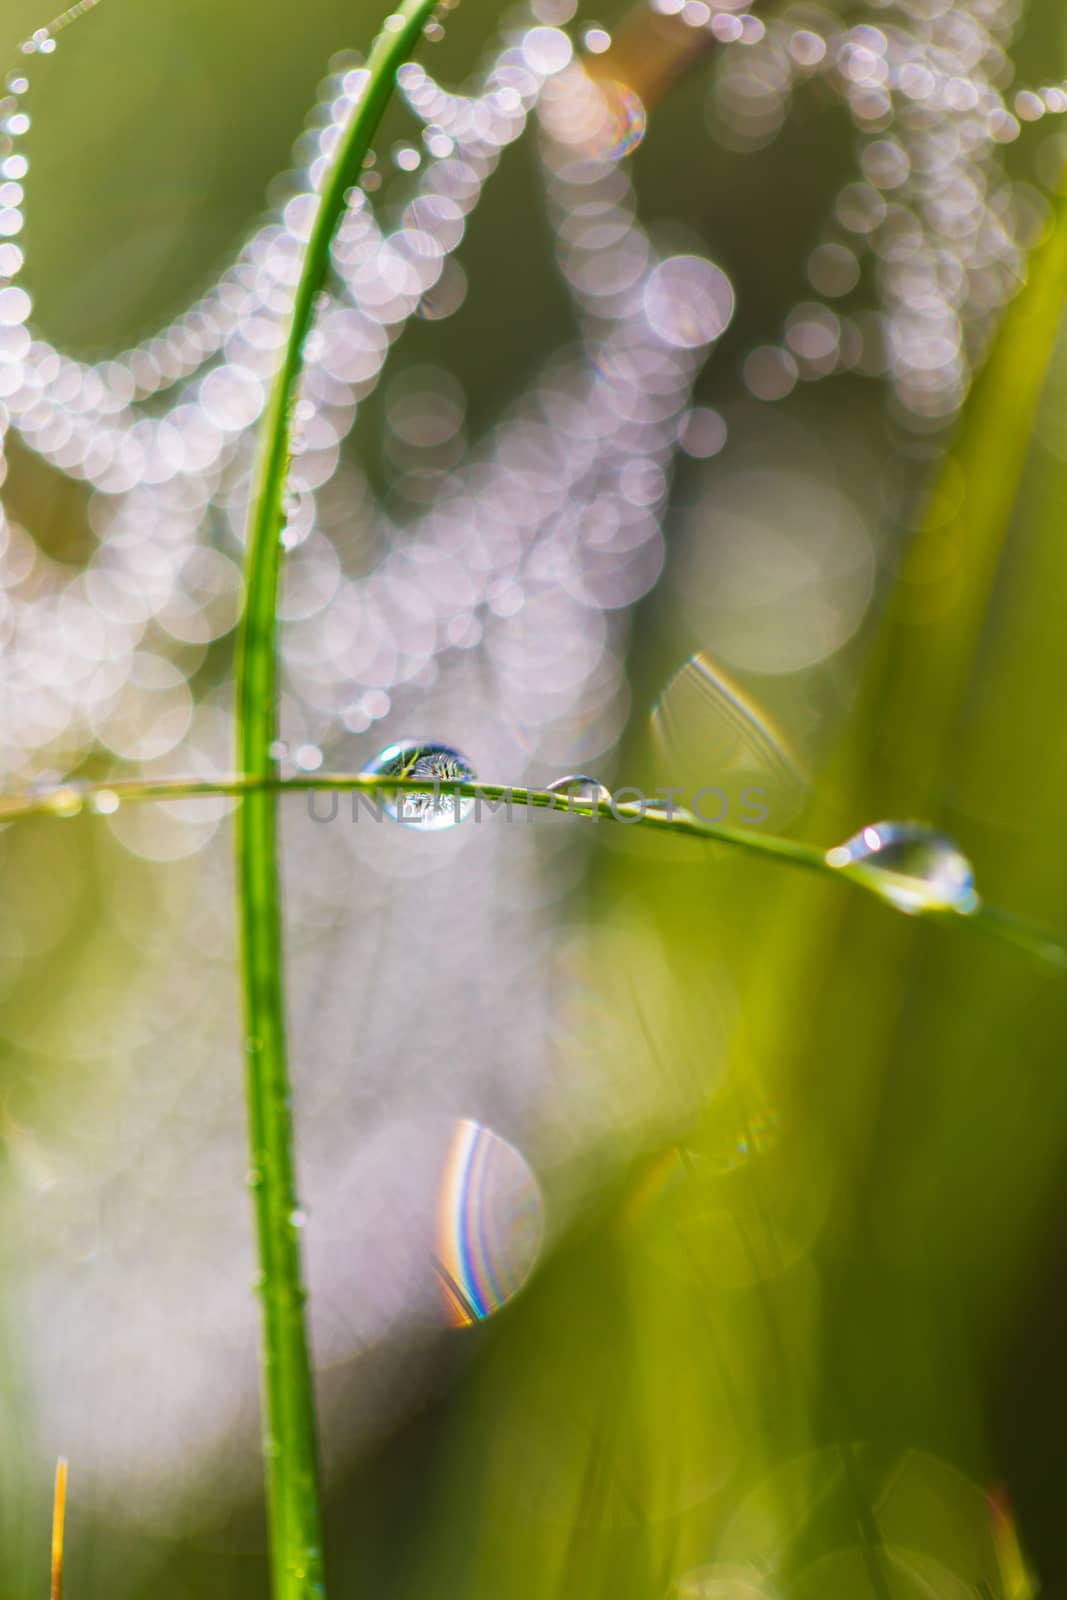 green grass in drops of dew field close-up